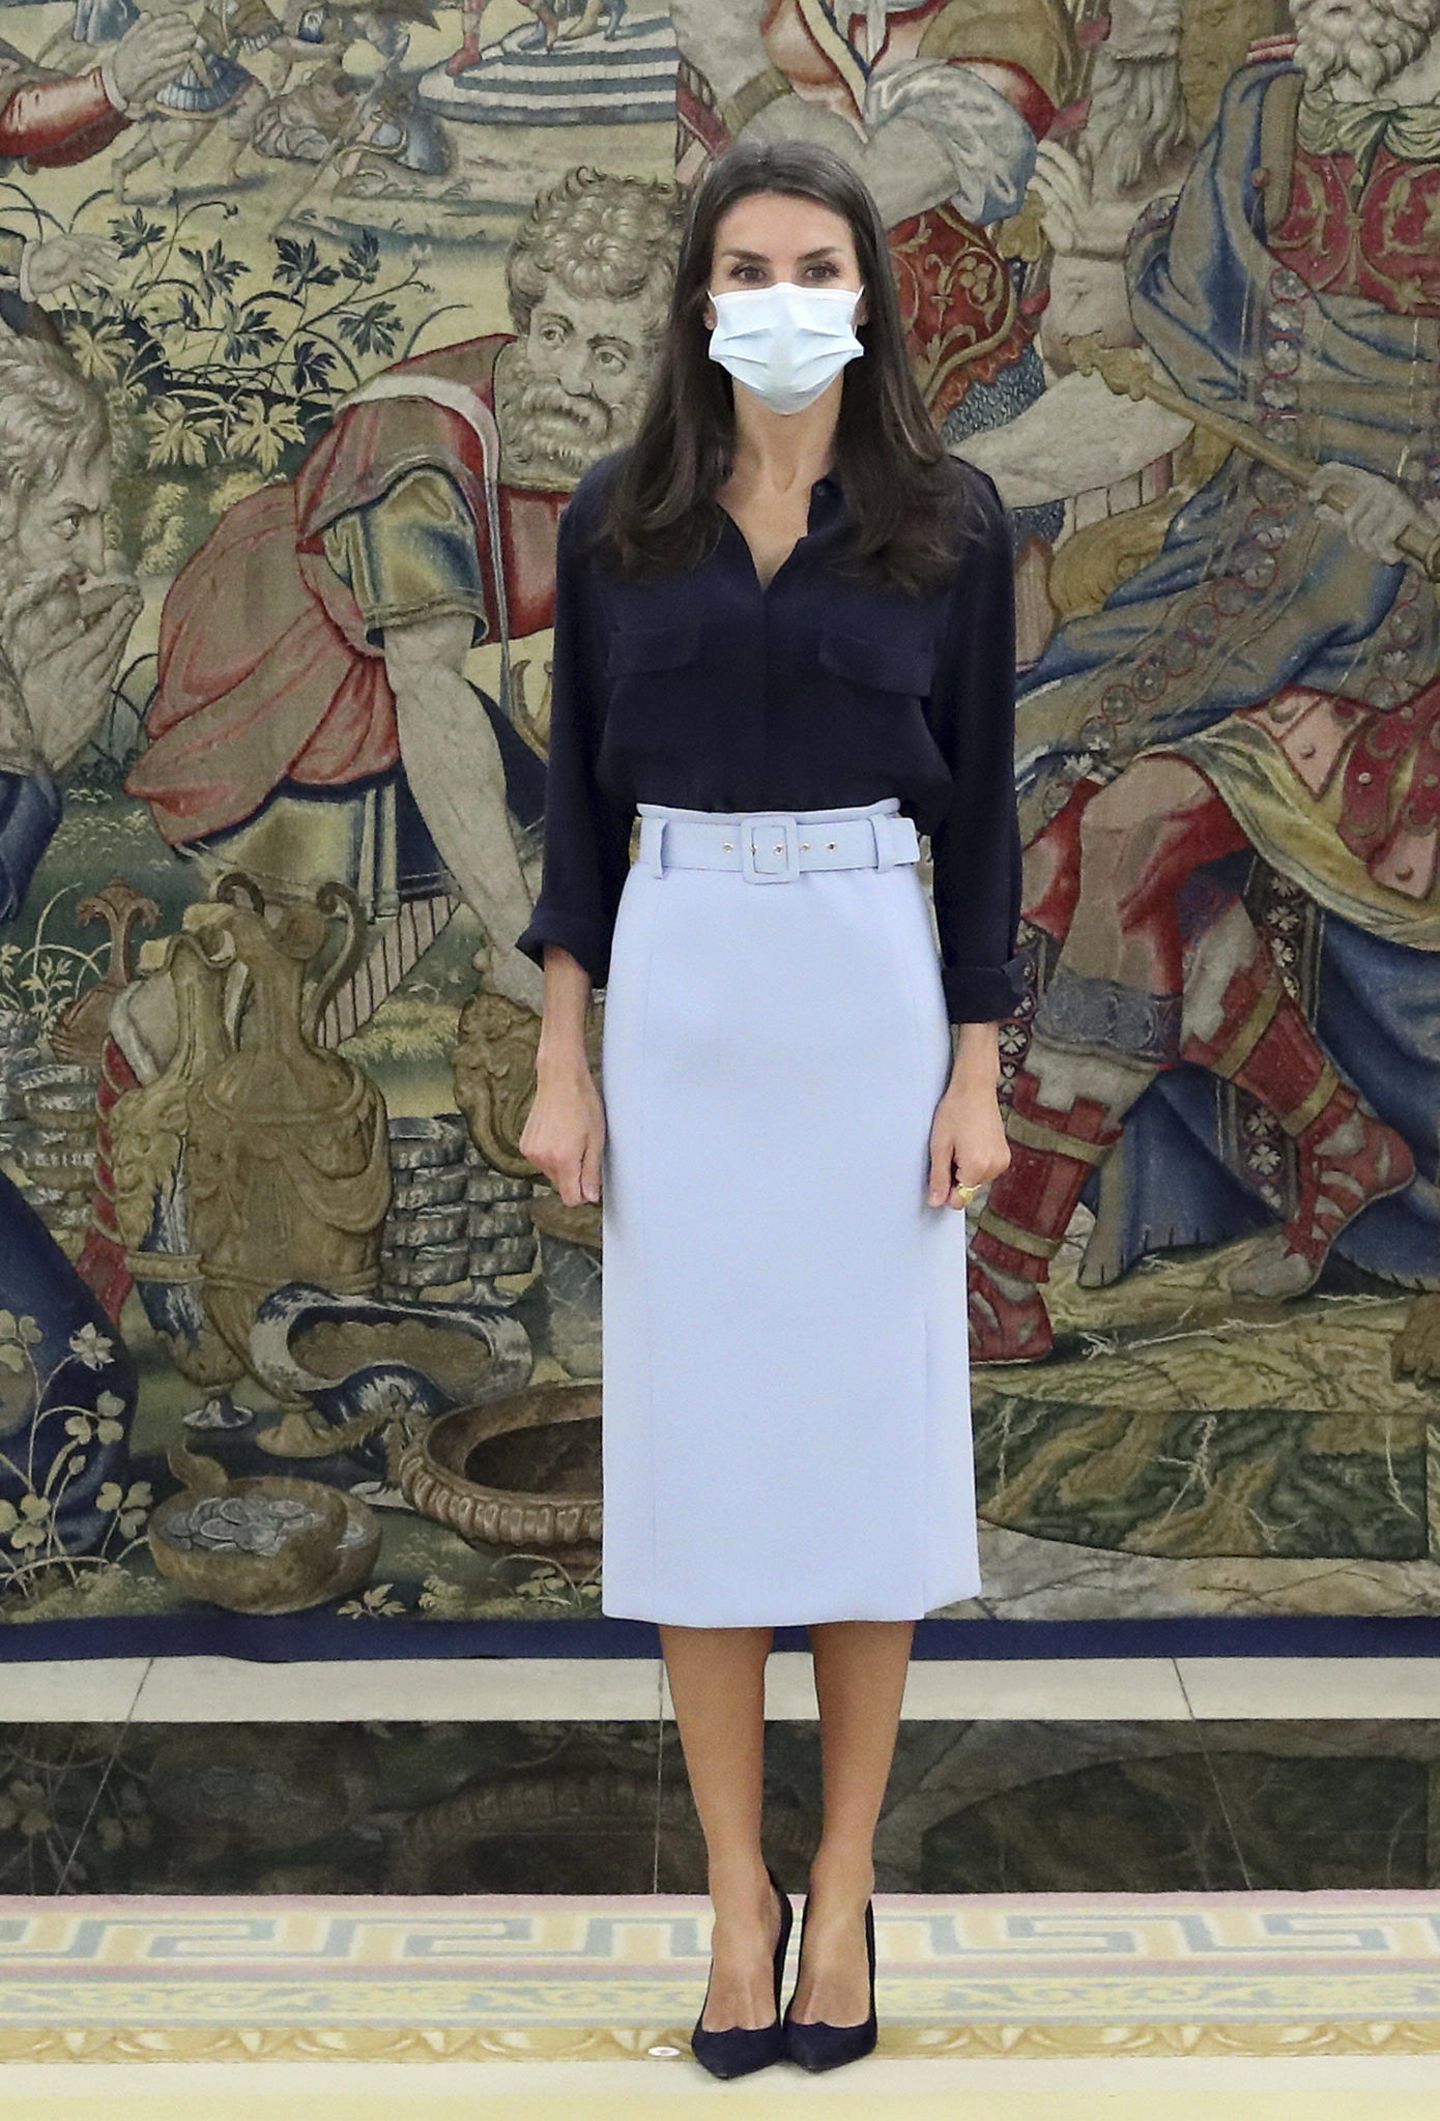 Queen Letizia: in the skirt "loading =" lazy